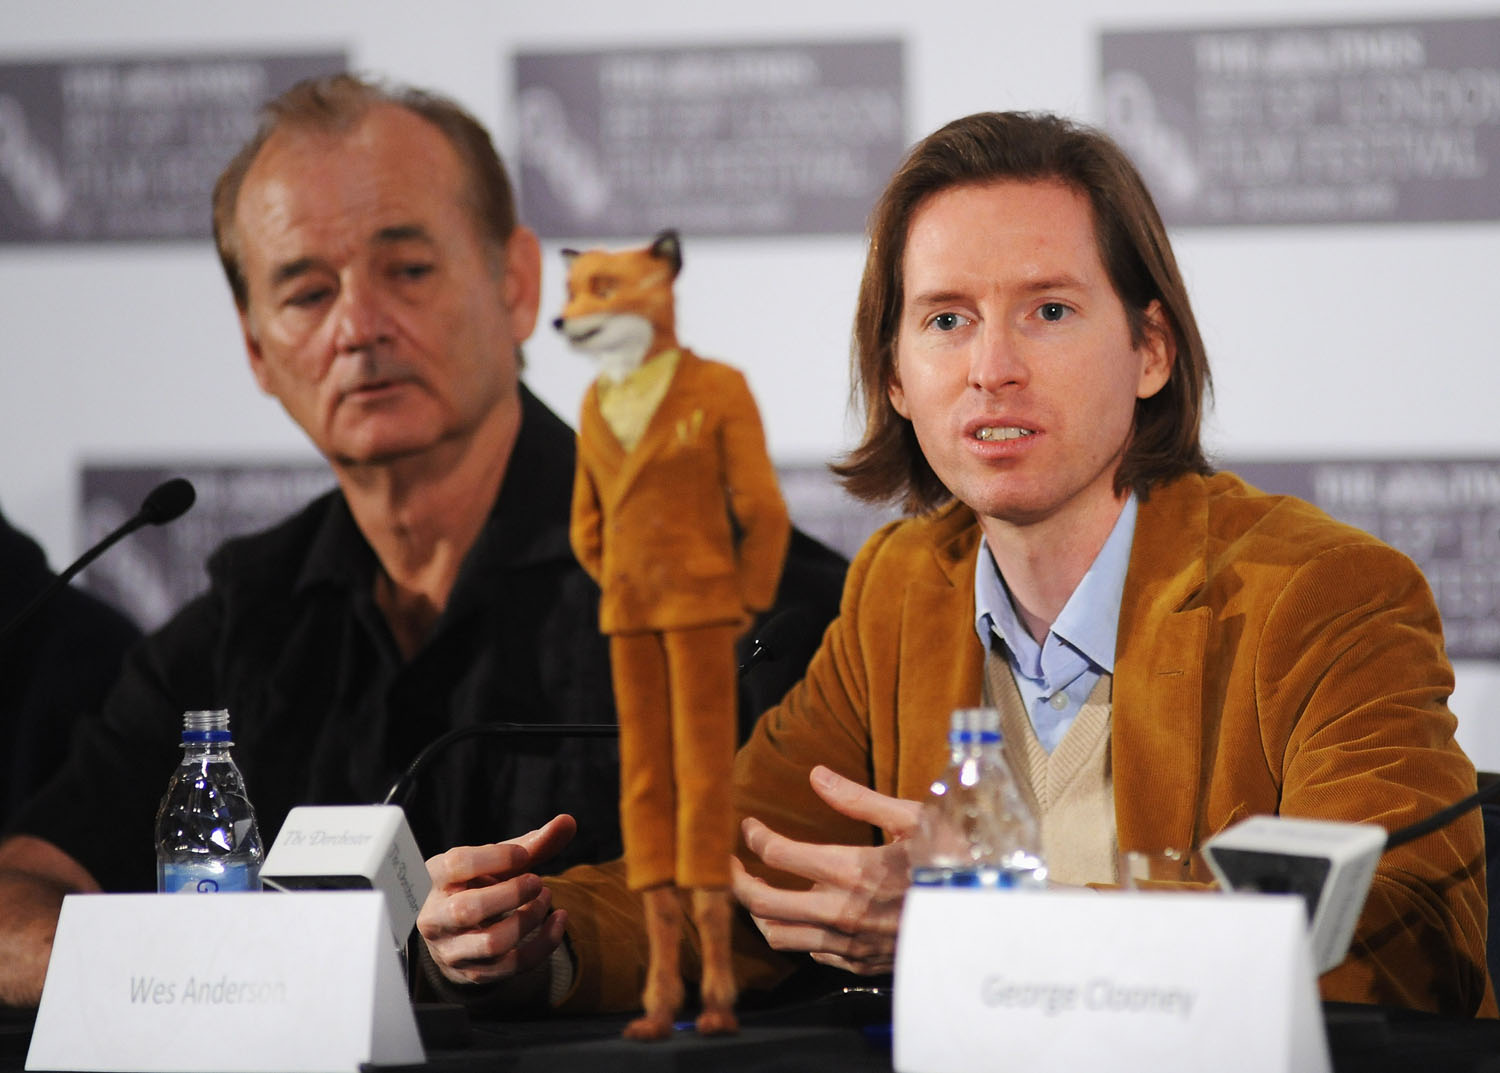 london-09-bill-murray-wes-anderson